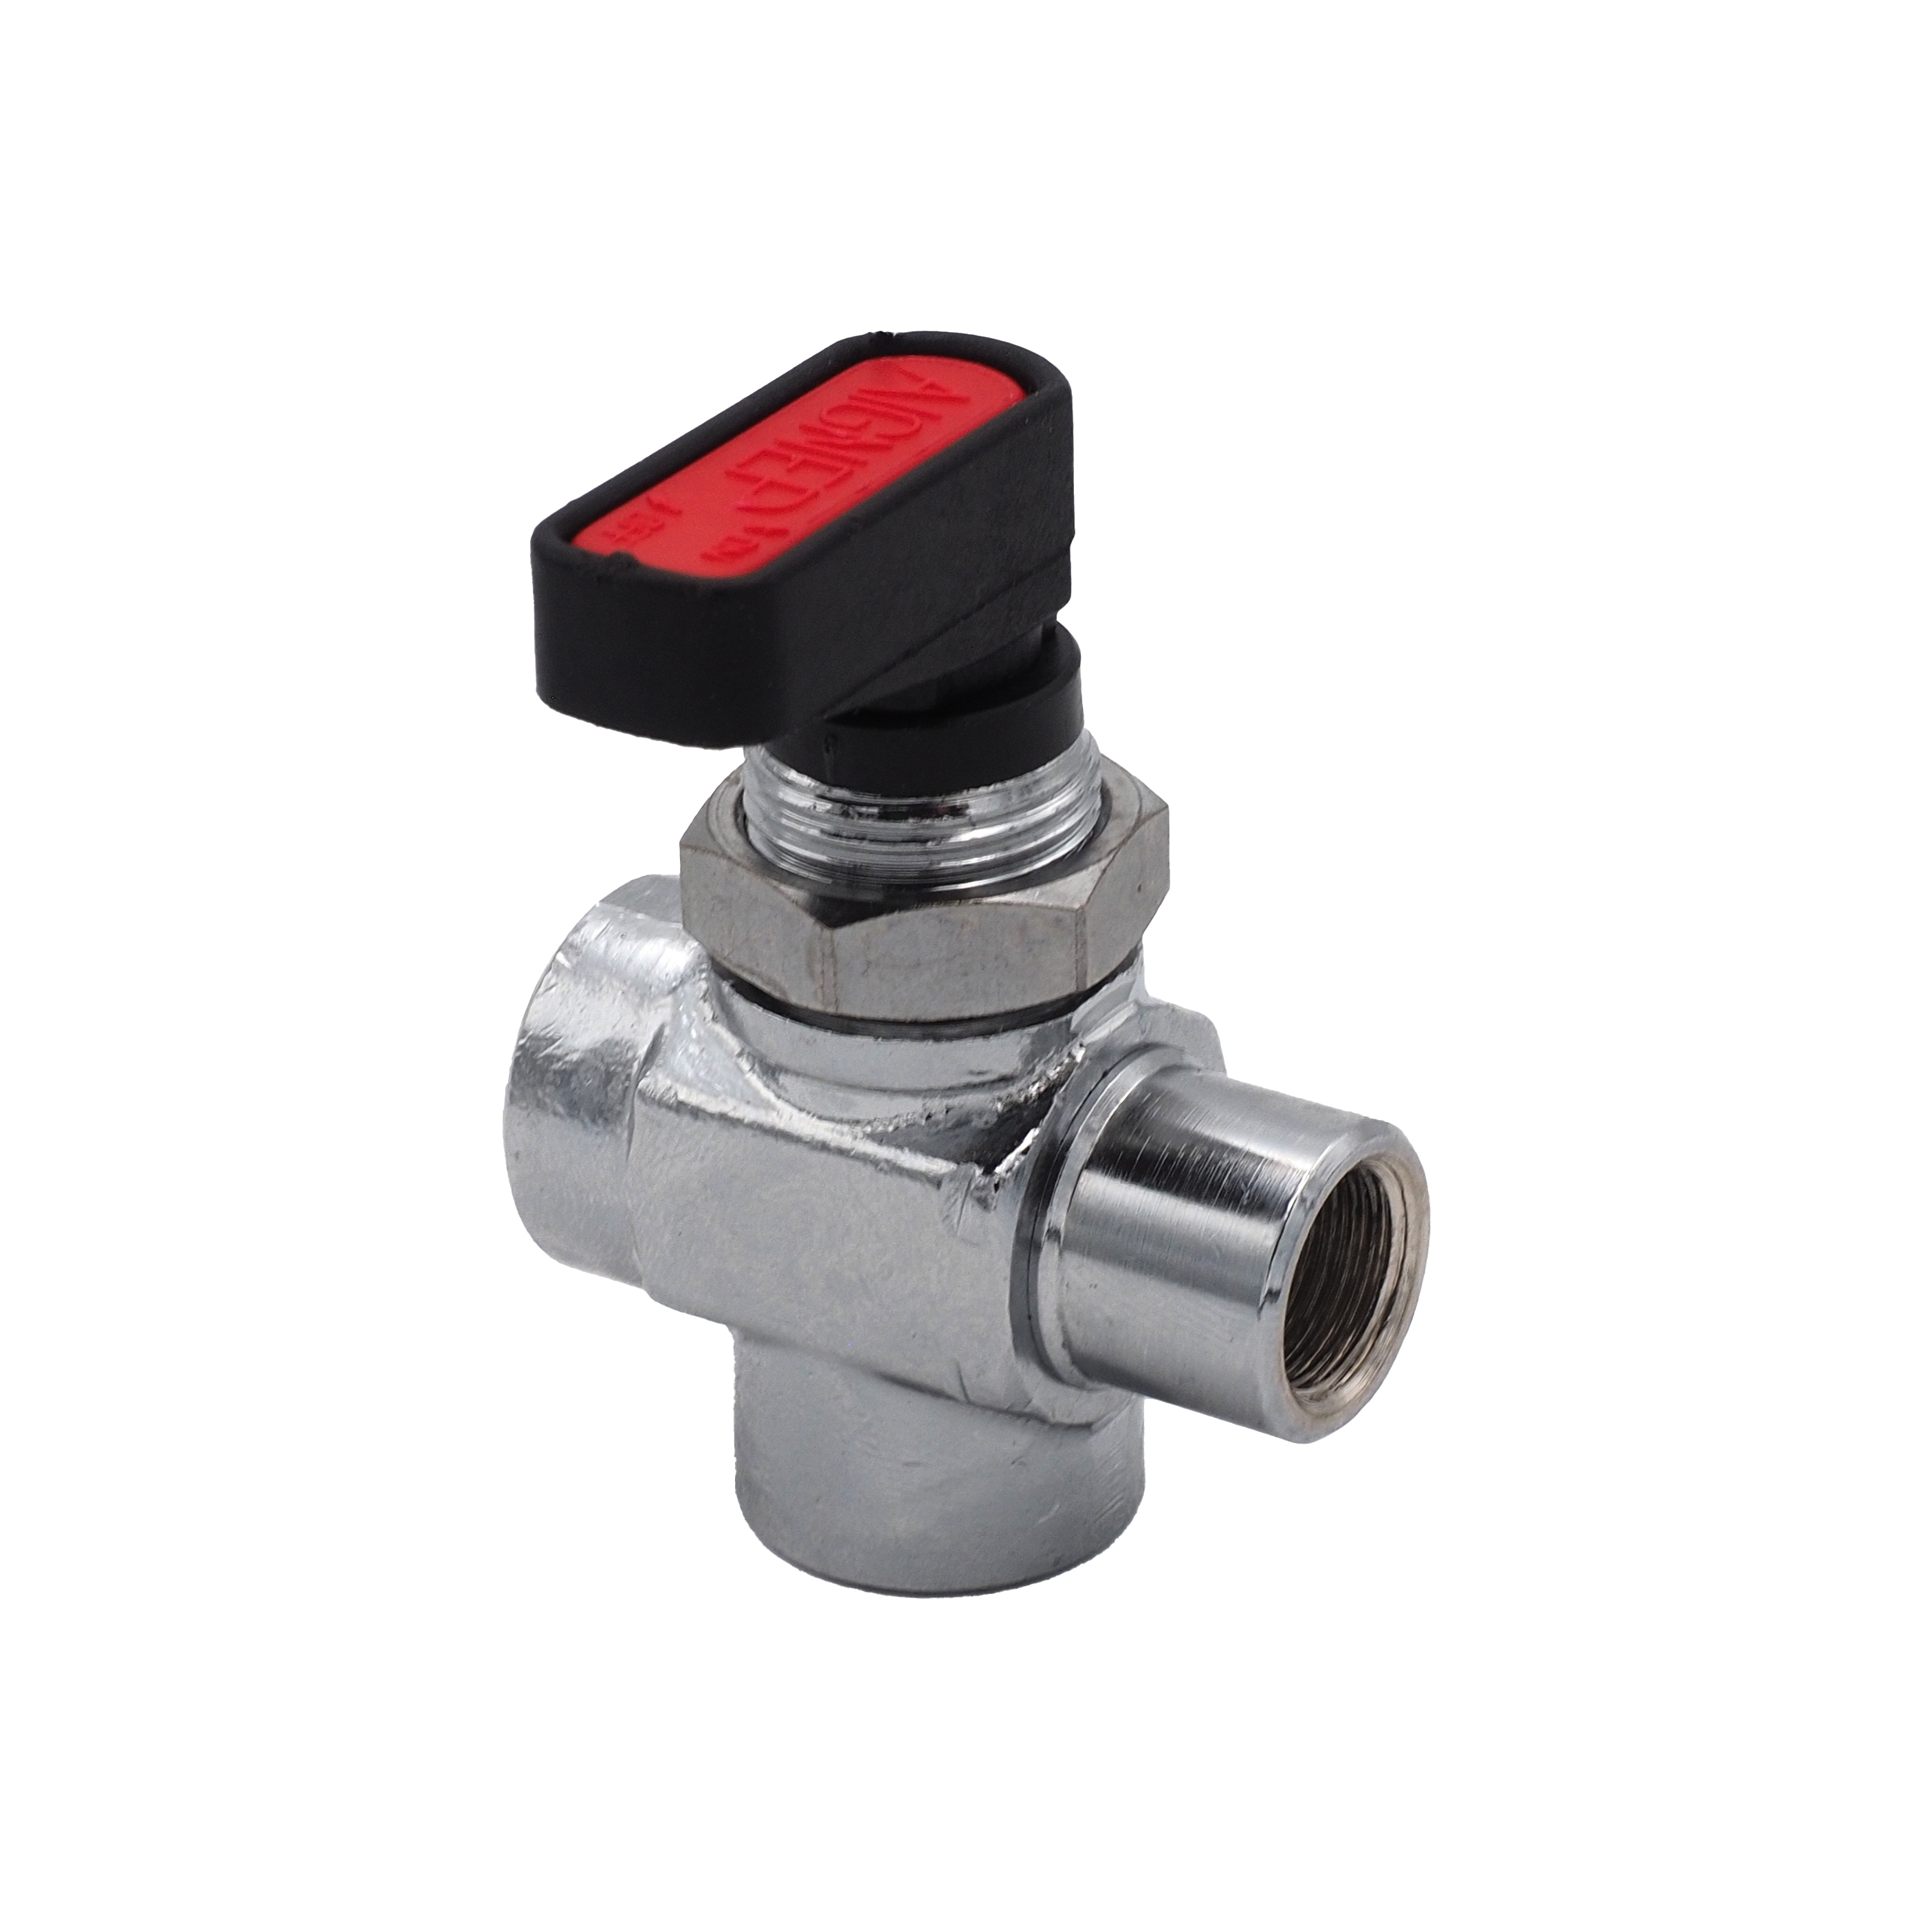 Ball valve 1/8" iw/iw/iw with L-bore
for pressure test 2000 NL V2 and HESV